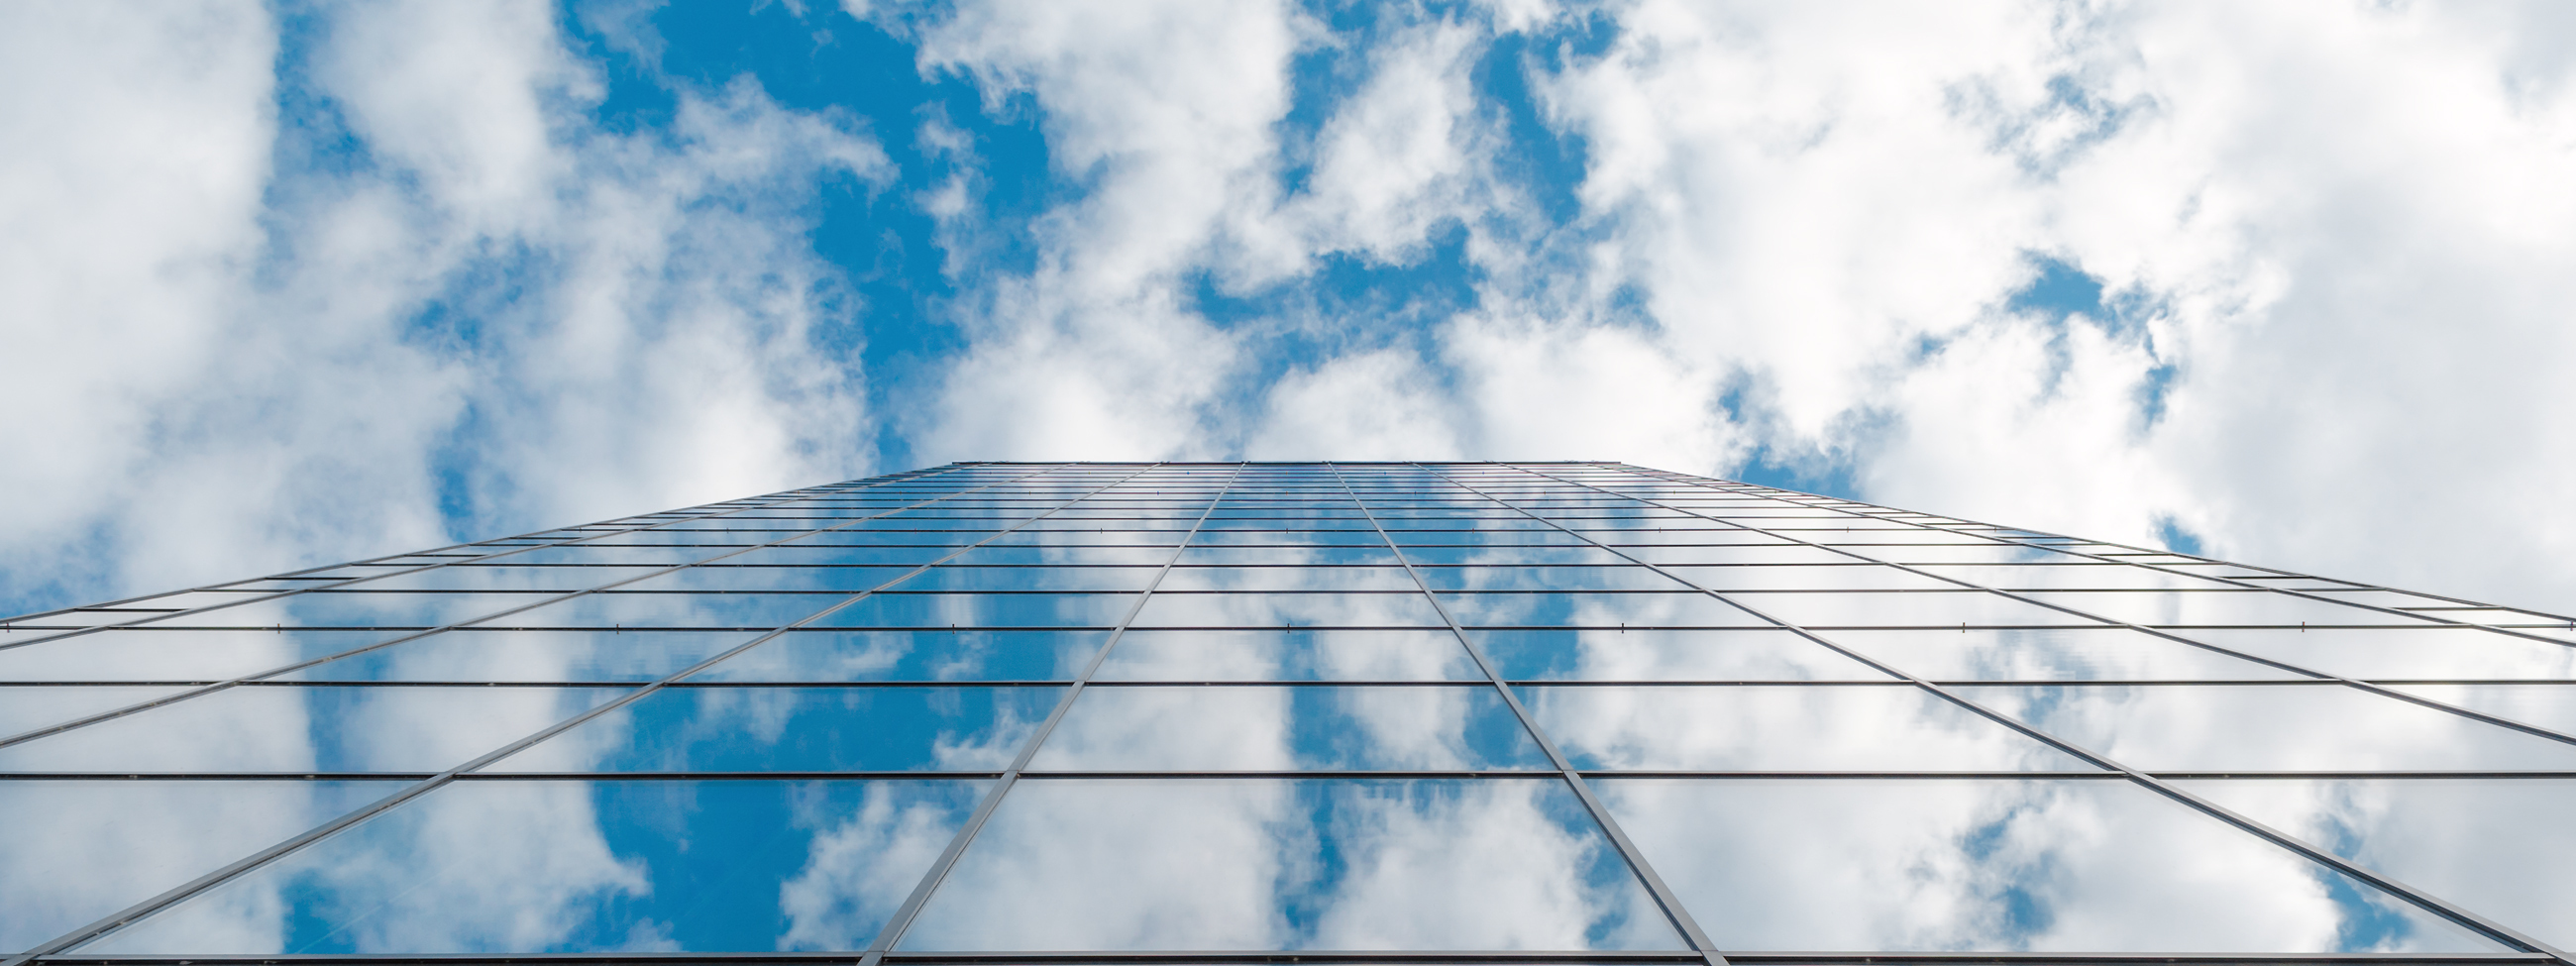 modern business high rise glass building and blue sky with clouds 